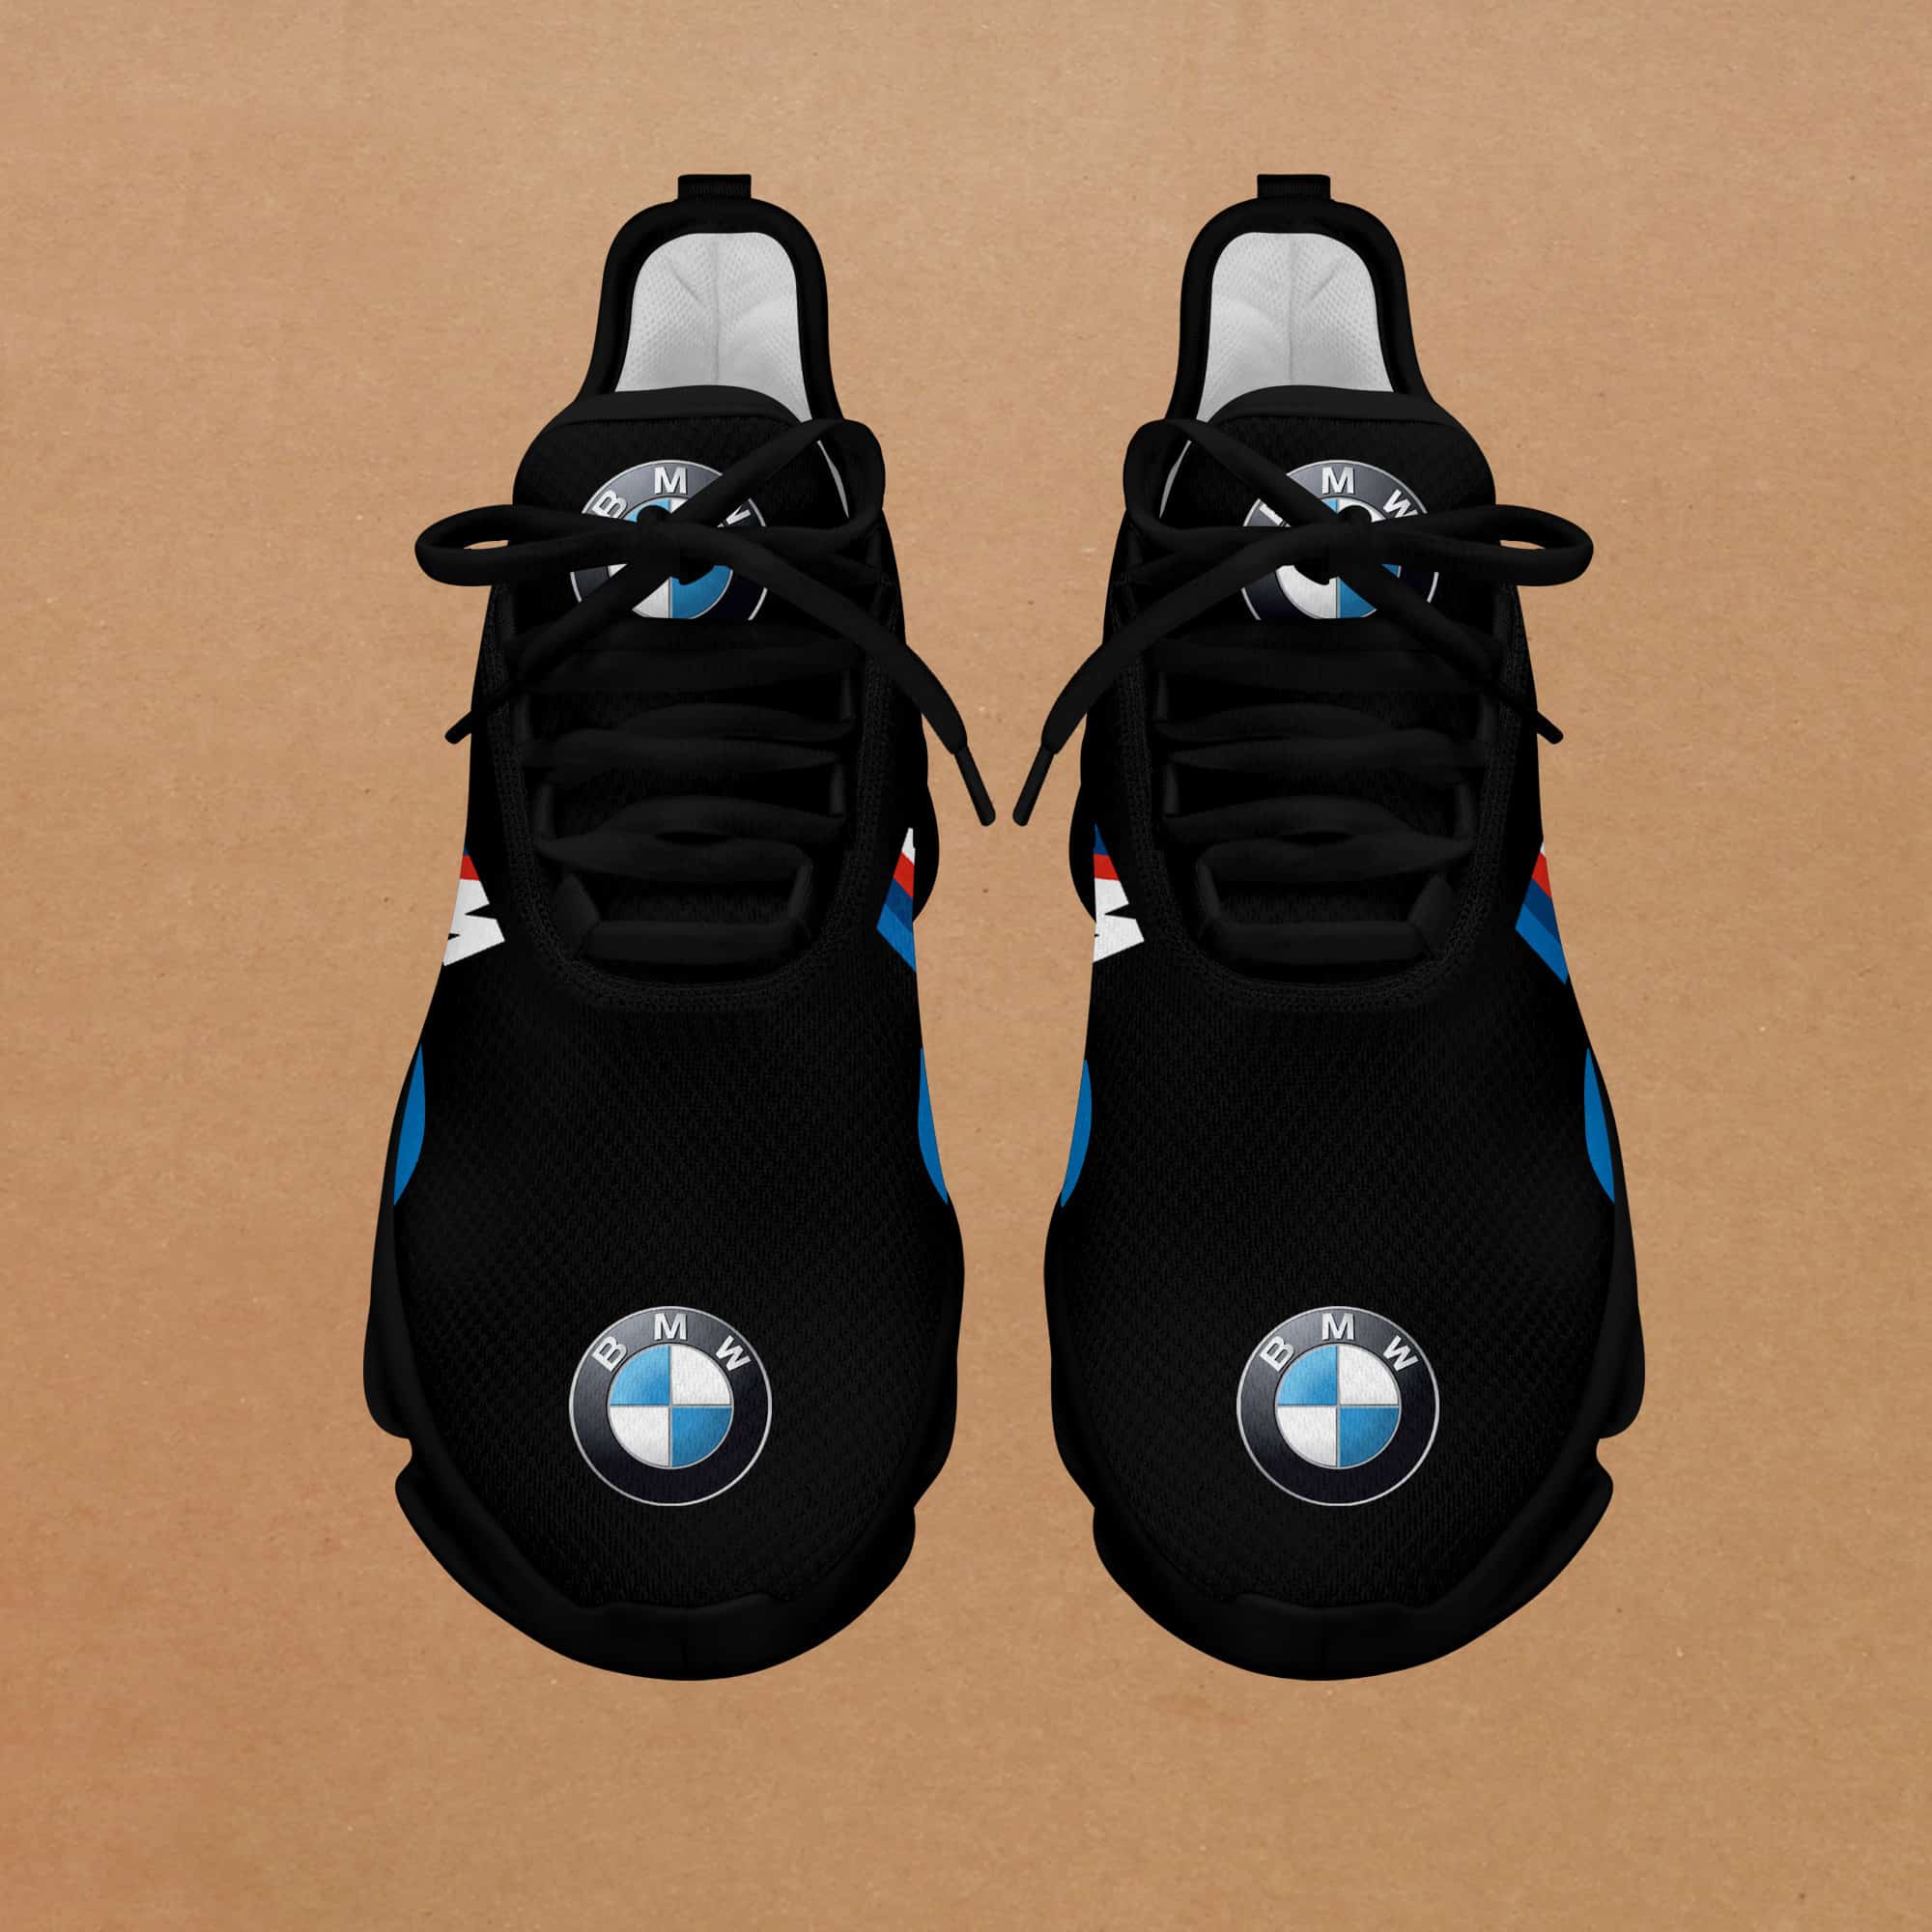 Bmw M Running Shoes Max Soul Shoes Sneakers Ver 3 4